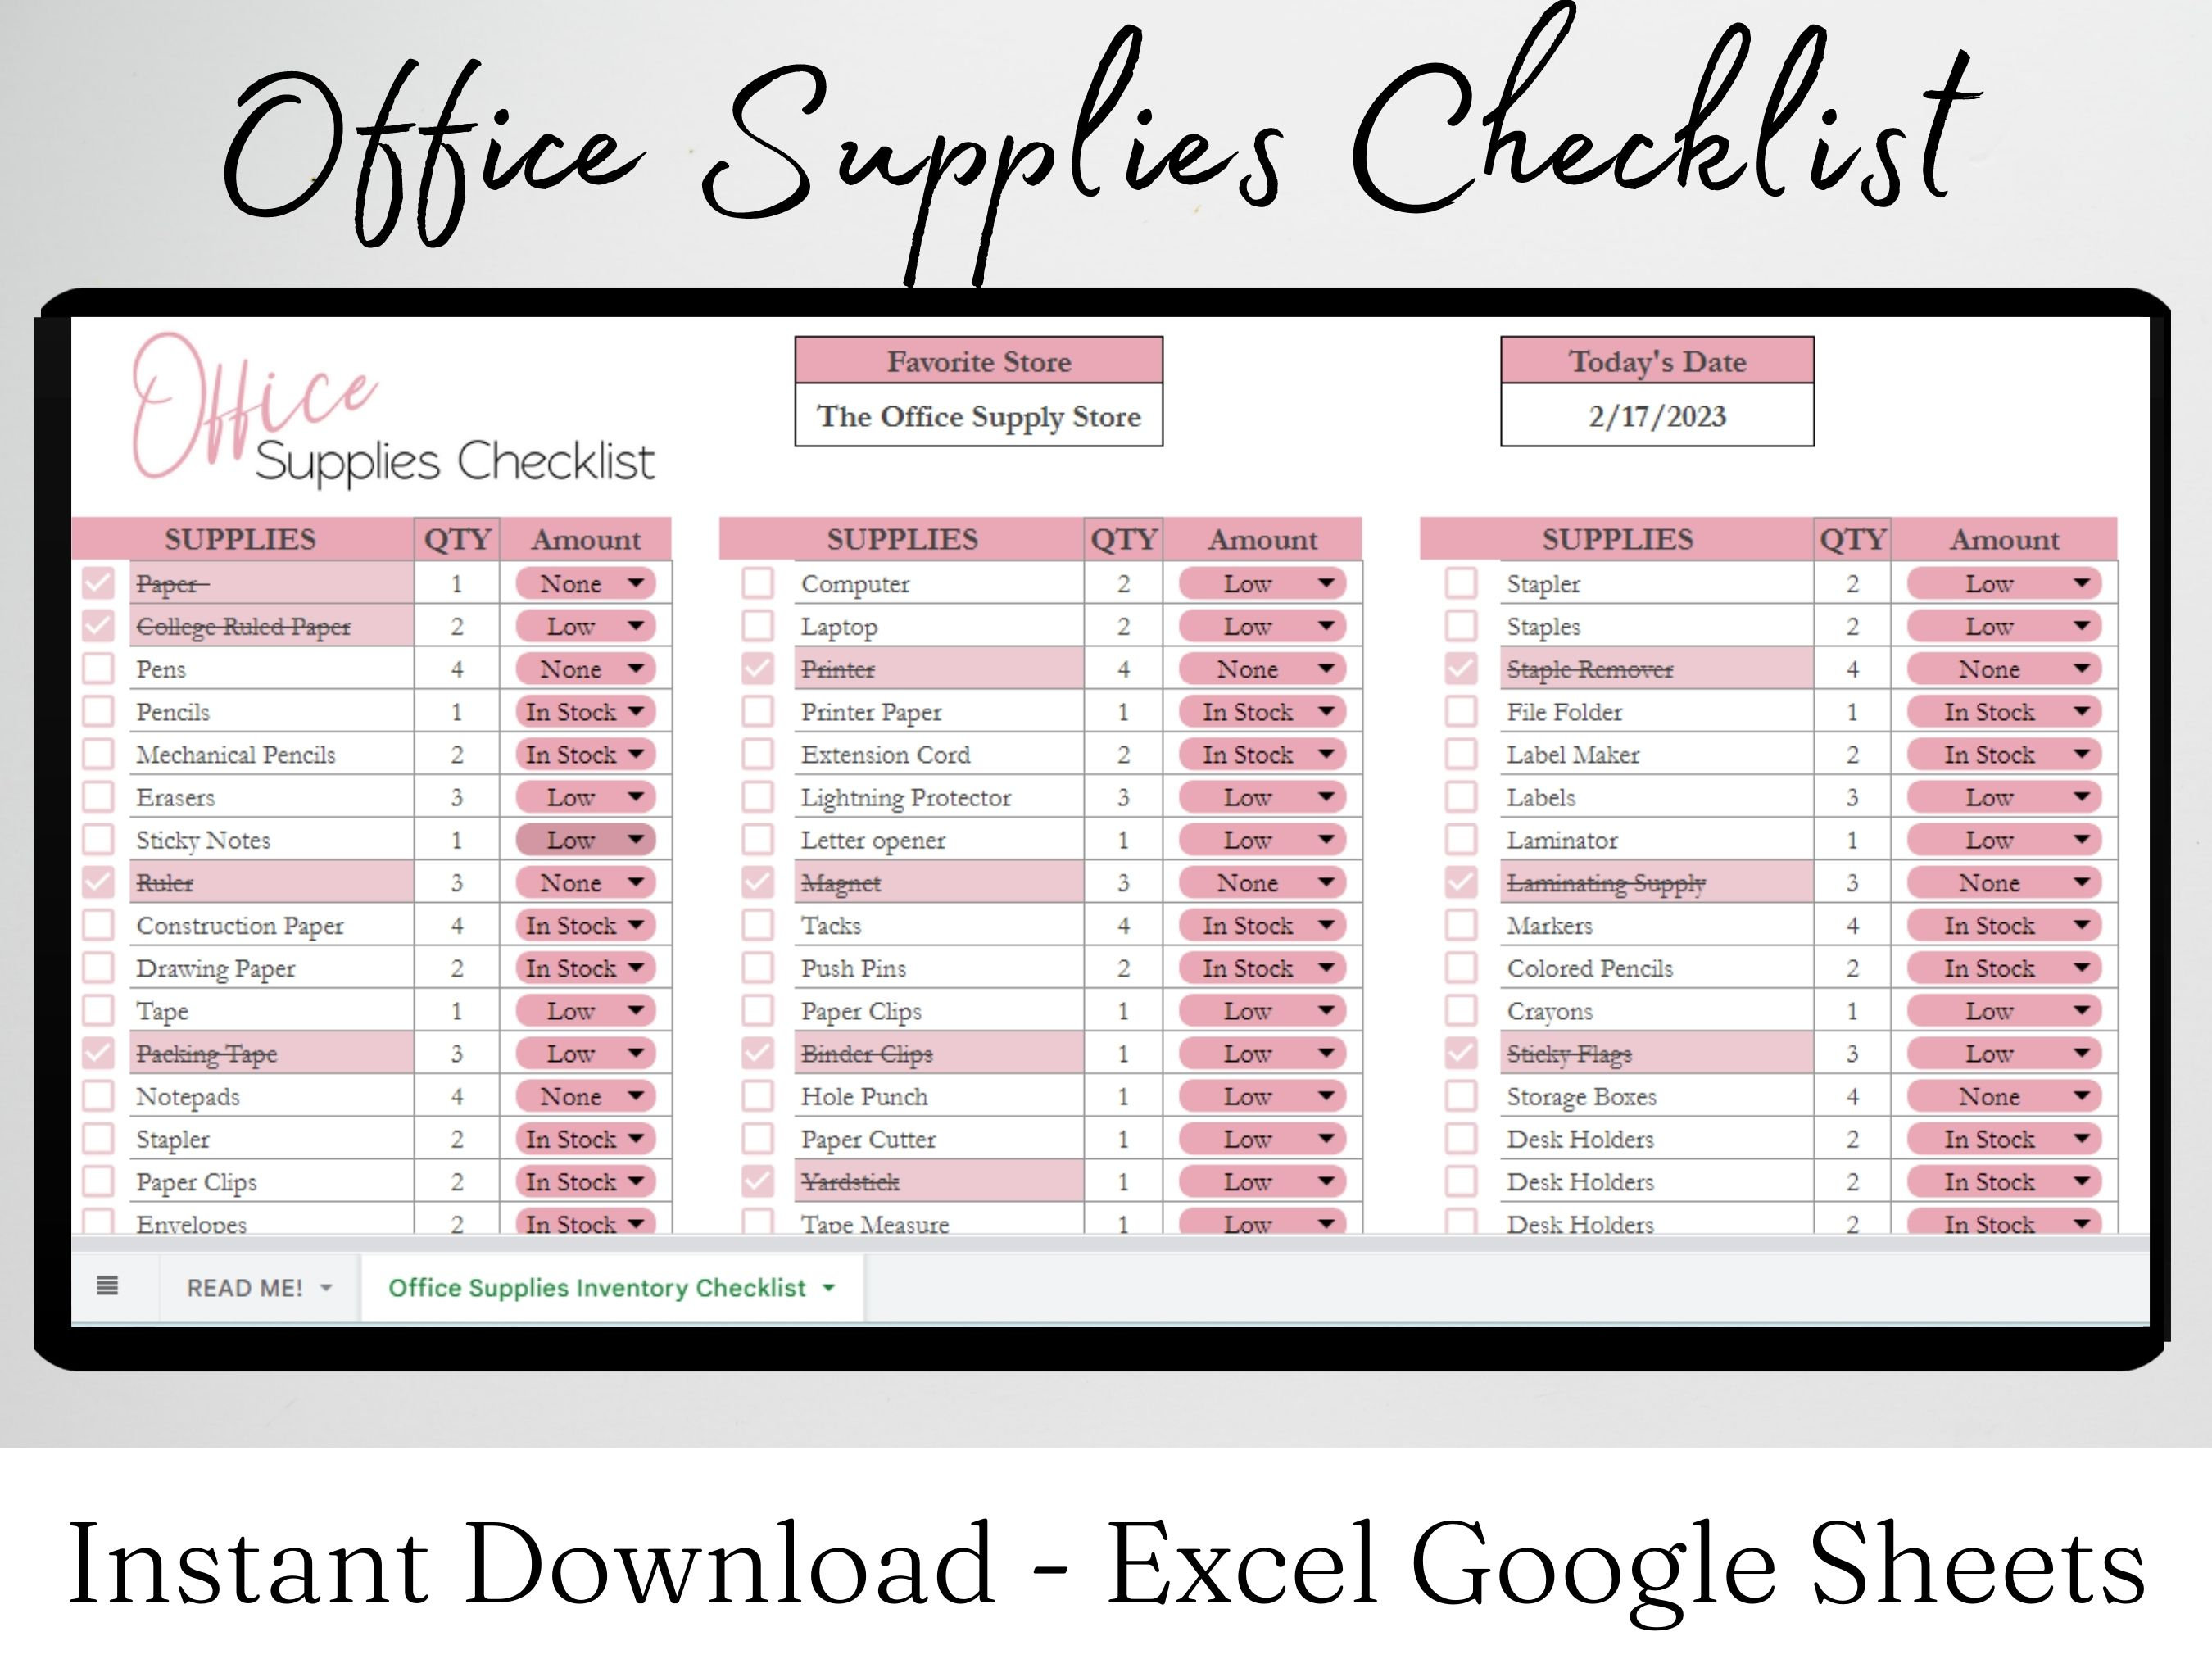 The Ultimate Office Supply Checklist for Your Office